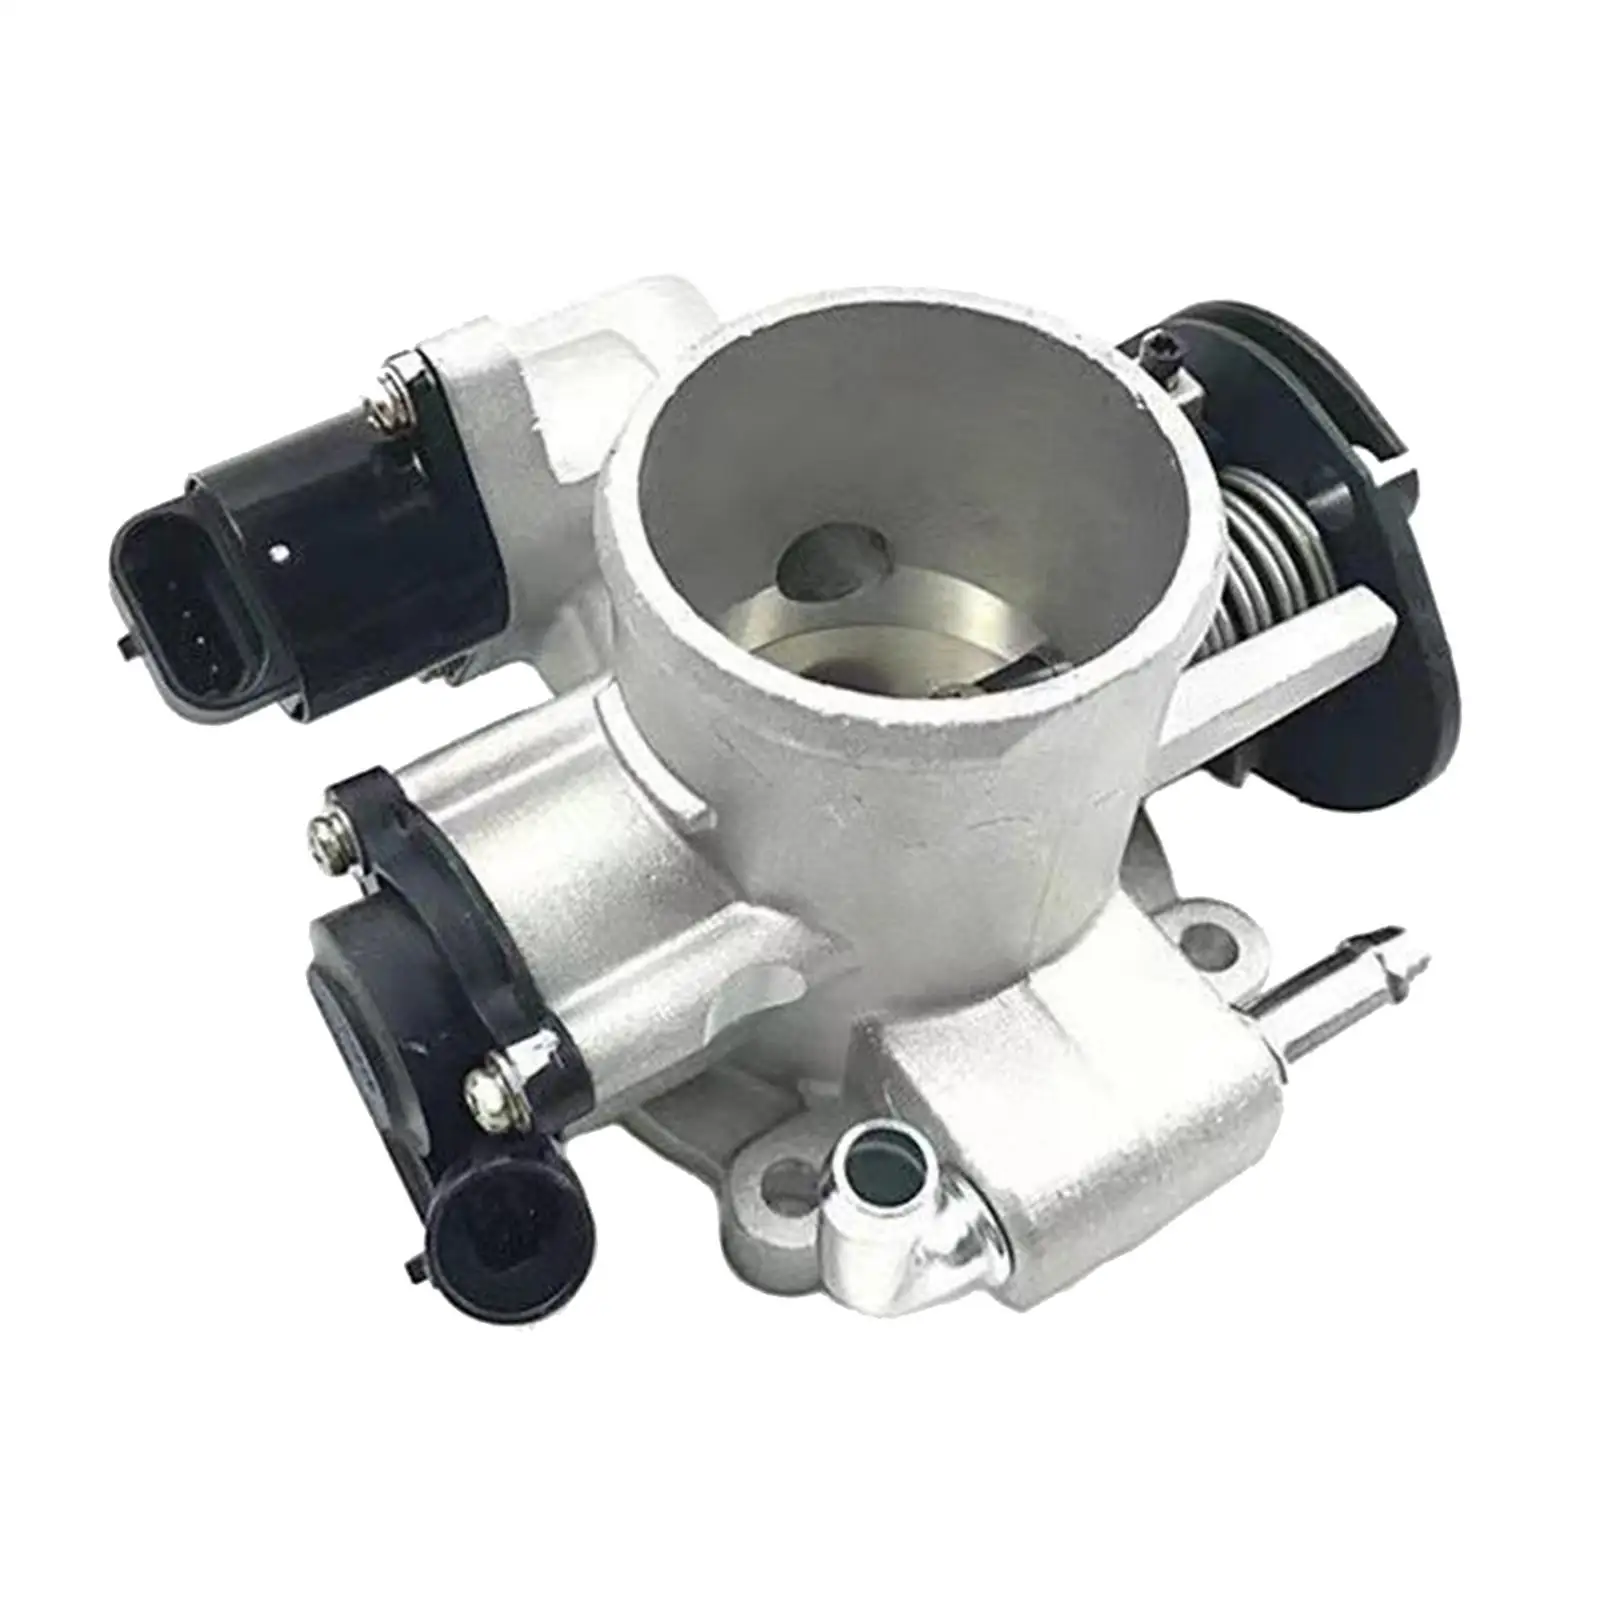 Throttle Body Assembly 96378856 for Buick Excelle 1.6 Convenient Installation Replacement Vehicle Repair Parts Professional